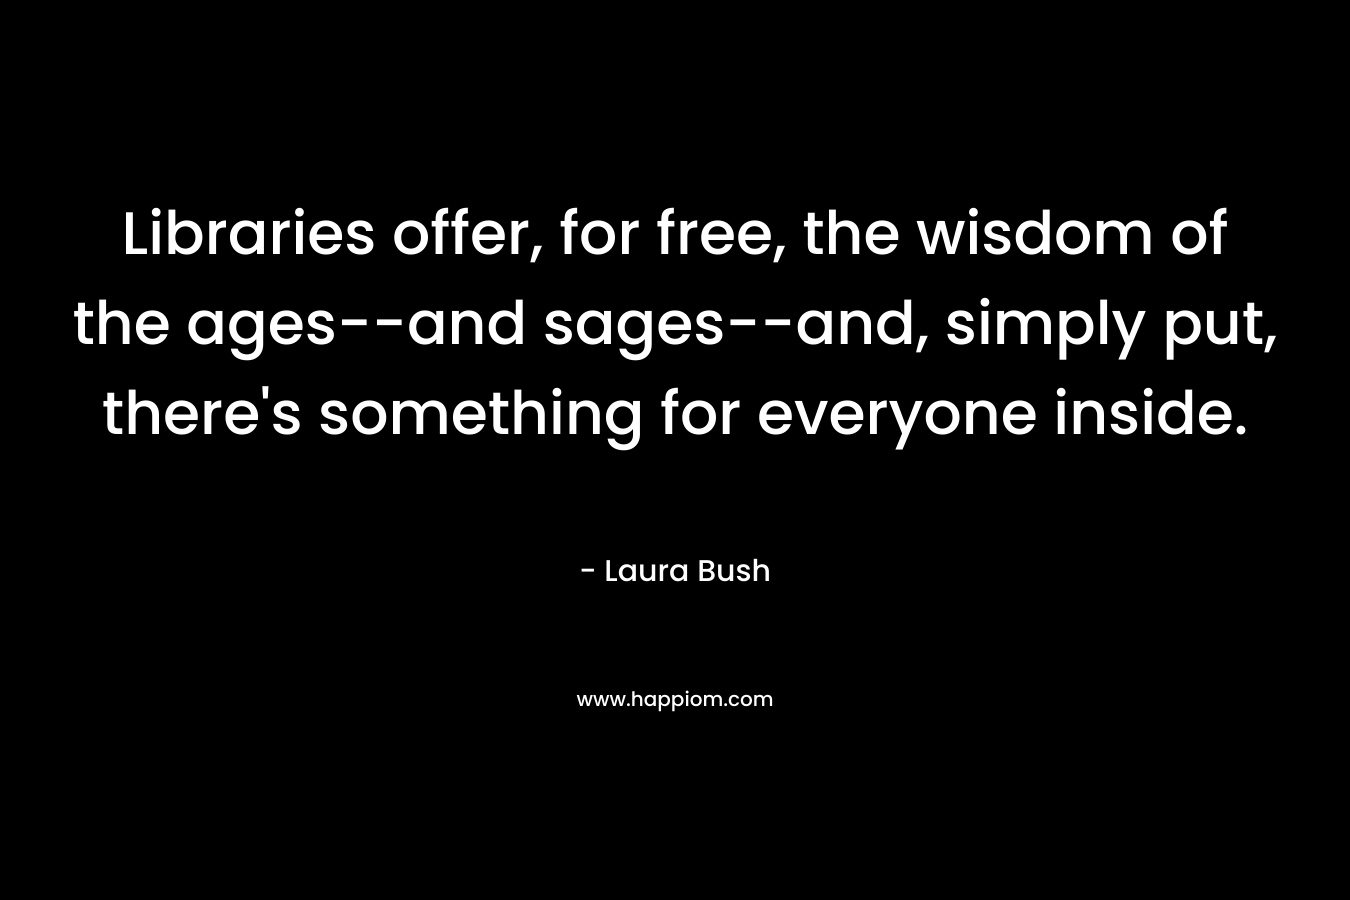 Libraries offer, for free, the wisdom of the ages--and sages--and, simply put, there's something for everyone inside.